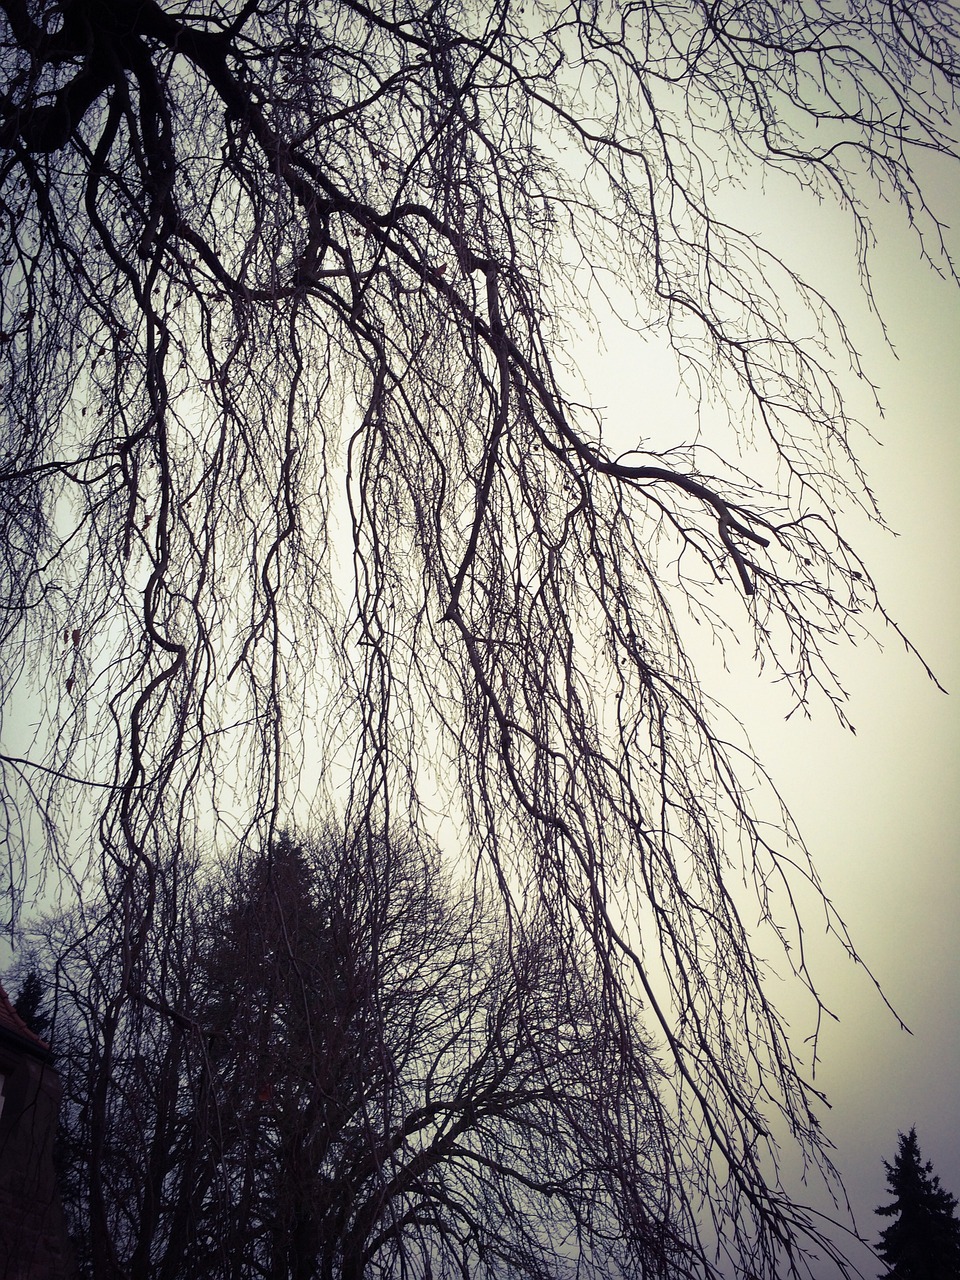 there is no image here to provide a caption for, a picture, by Jaakko Mattila, romanticism, intricate branches, weeping willows, phone photo, the sky is gray